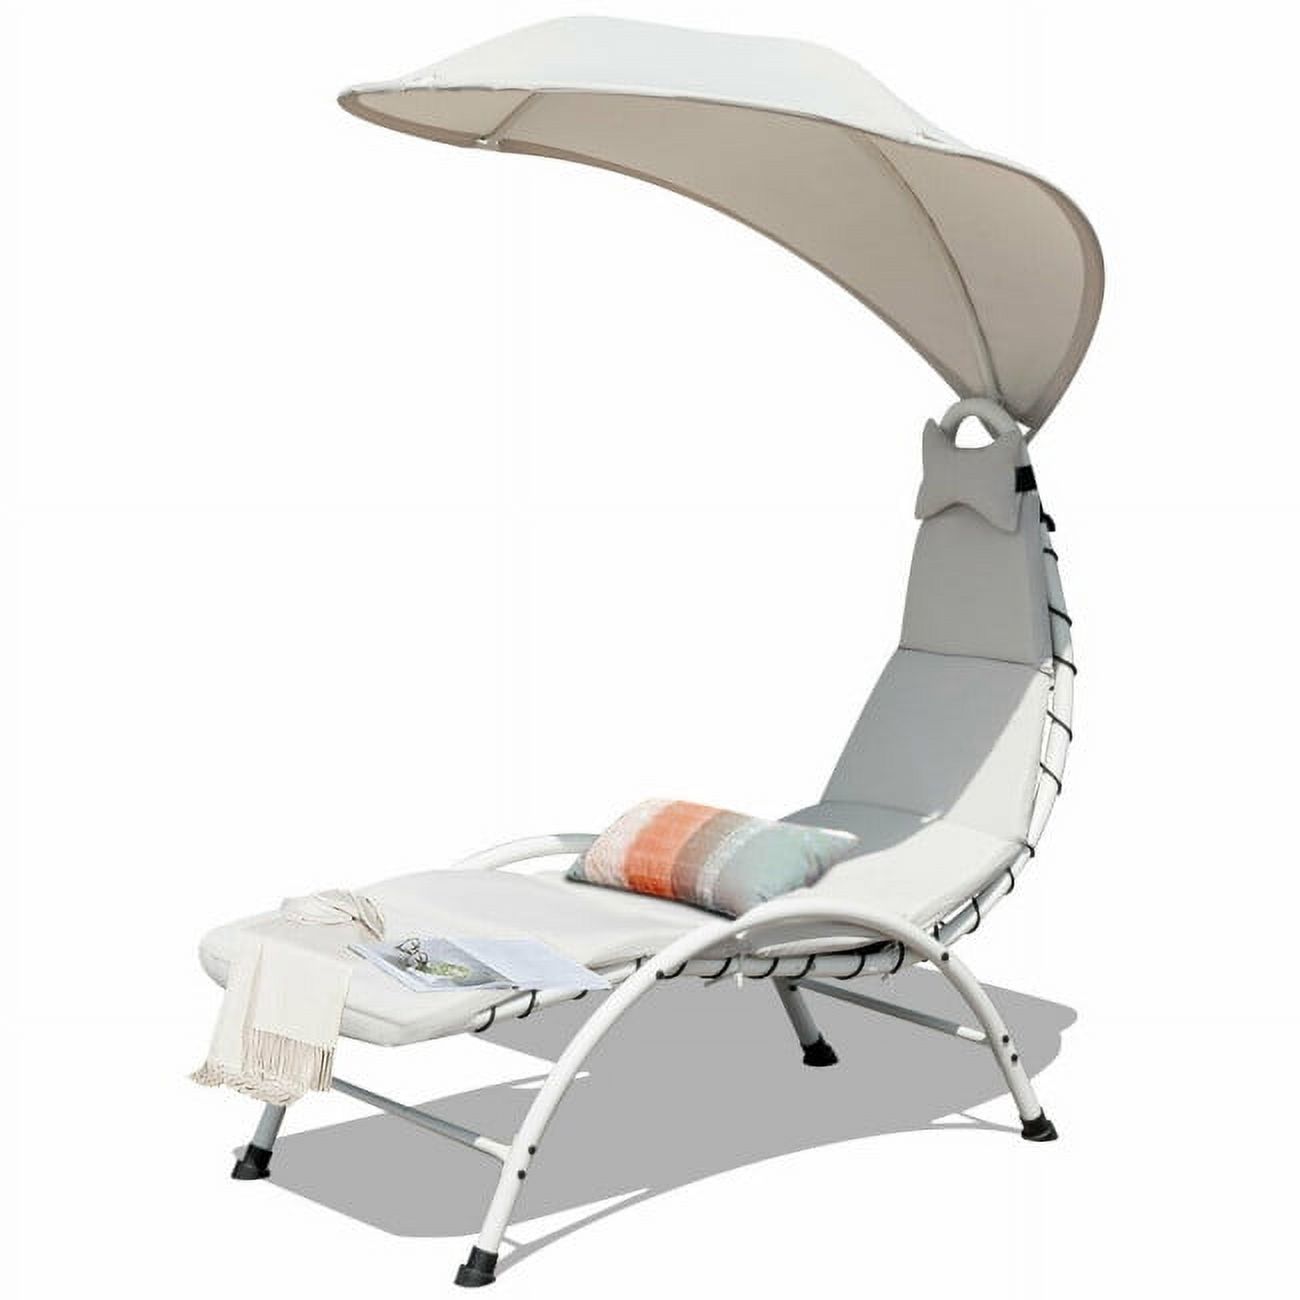 GIVIMO Patio Hanging Swing Hammock Chaise Lounger Chair with Canopy - image 1 of 9